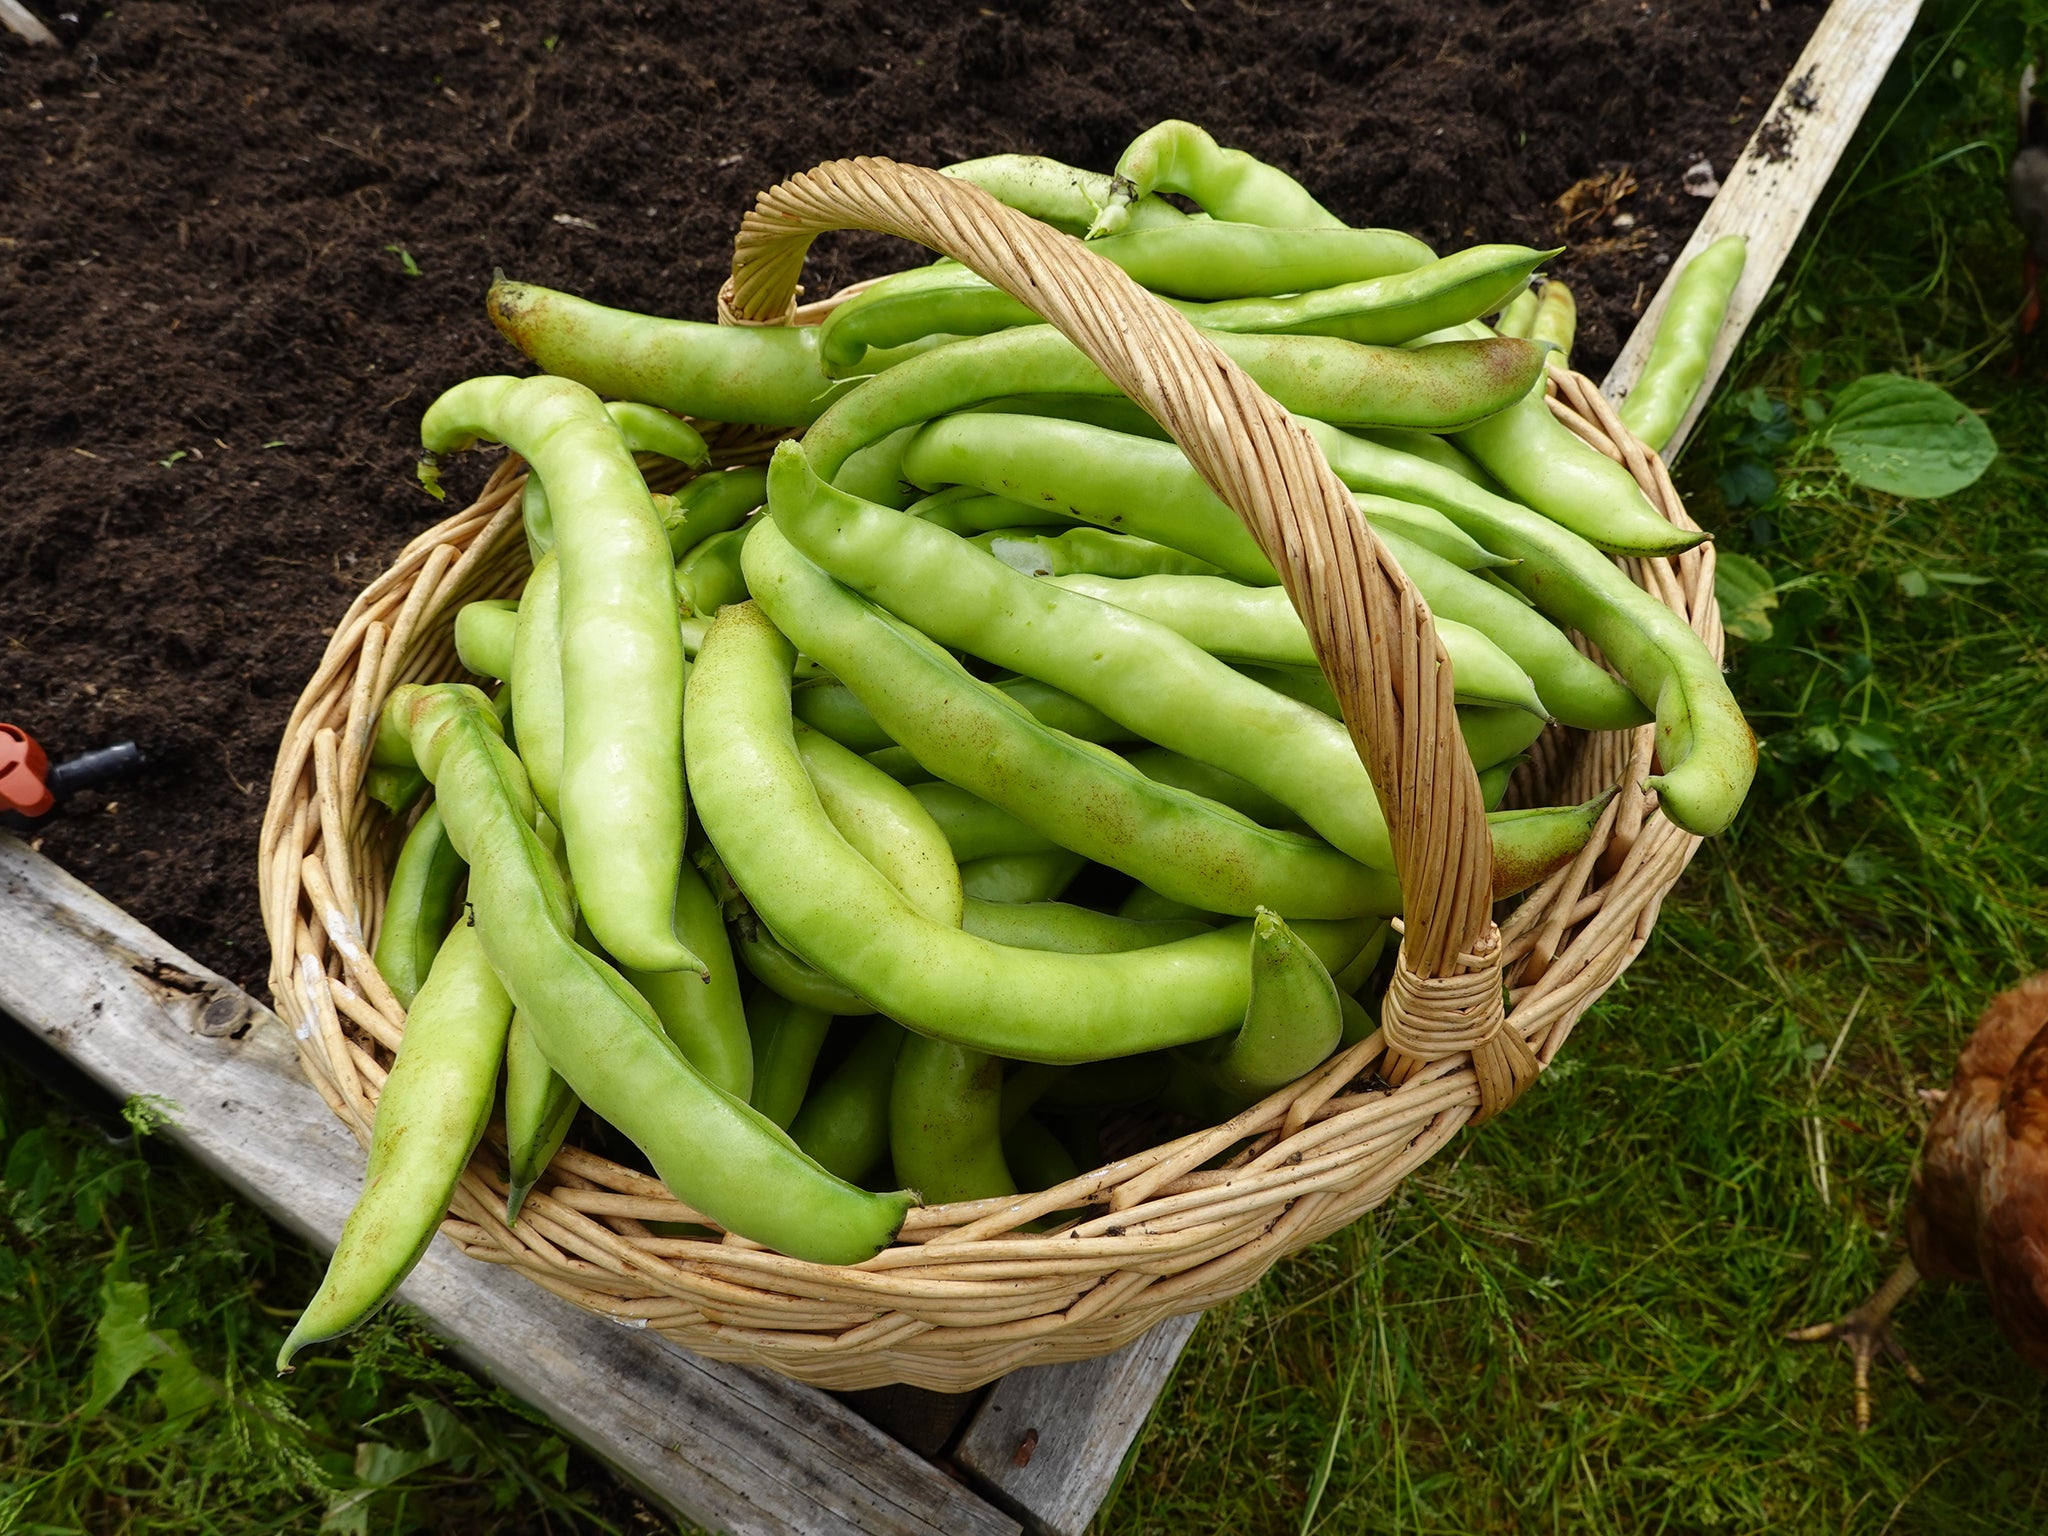 Broad beans are rich in protein, carbohydrates and vitamins A, B1 and B2